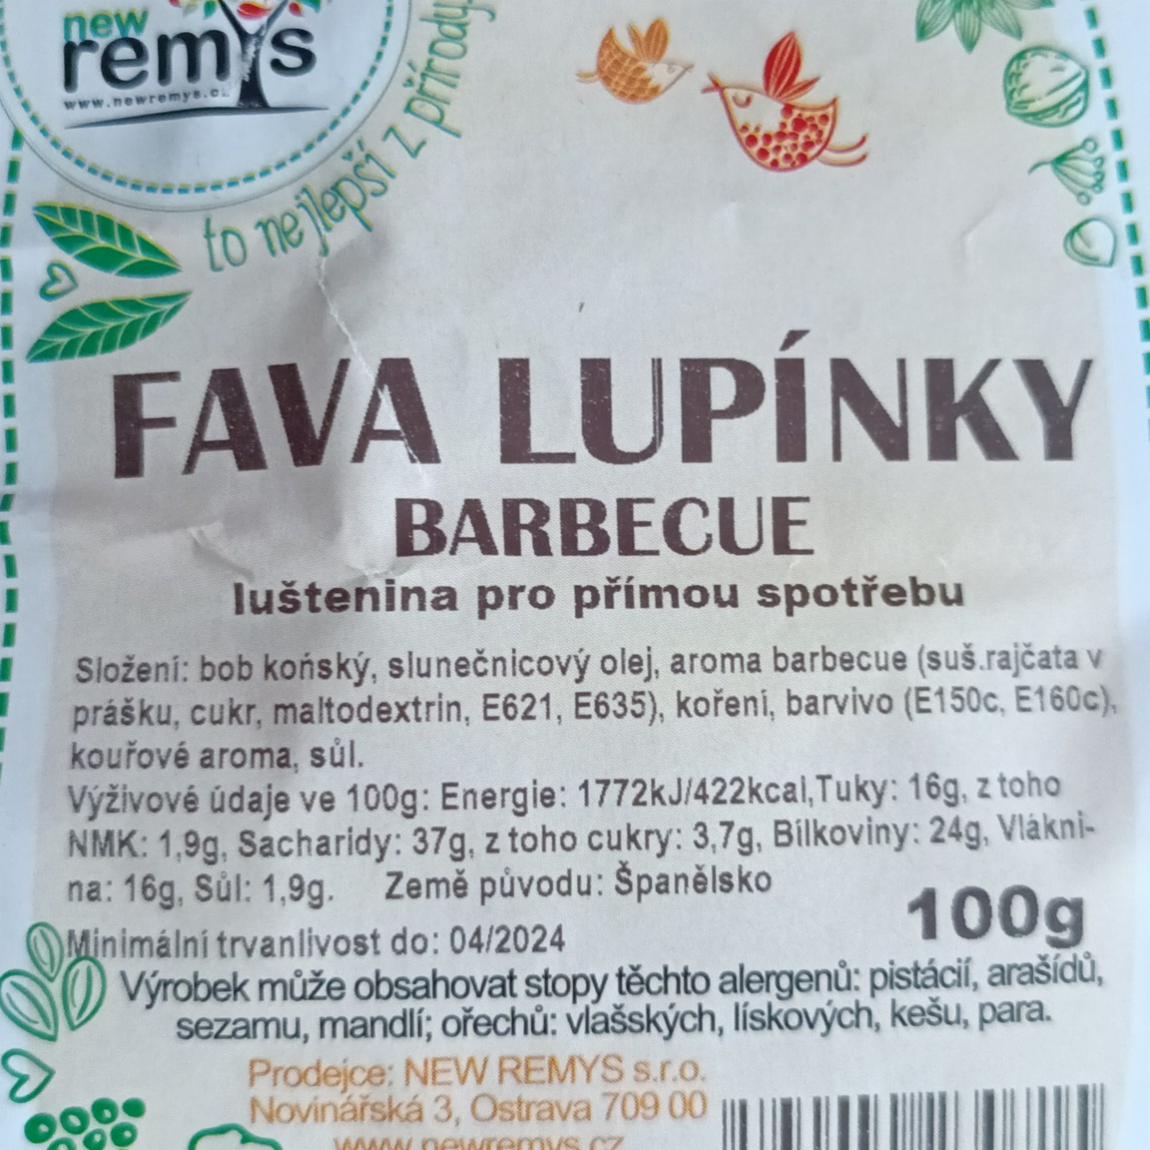 Fotografie - Fava lupínky Barbecue New Remys